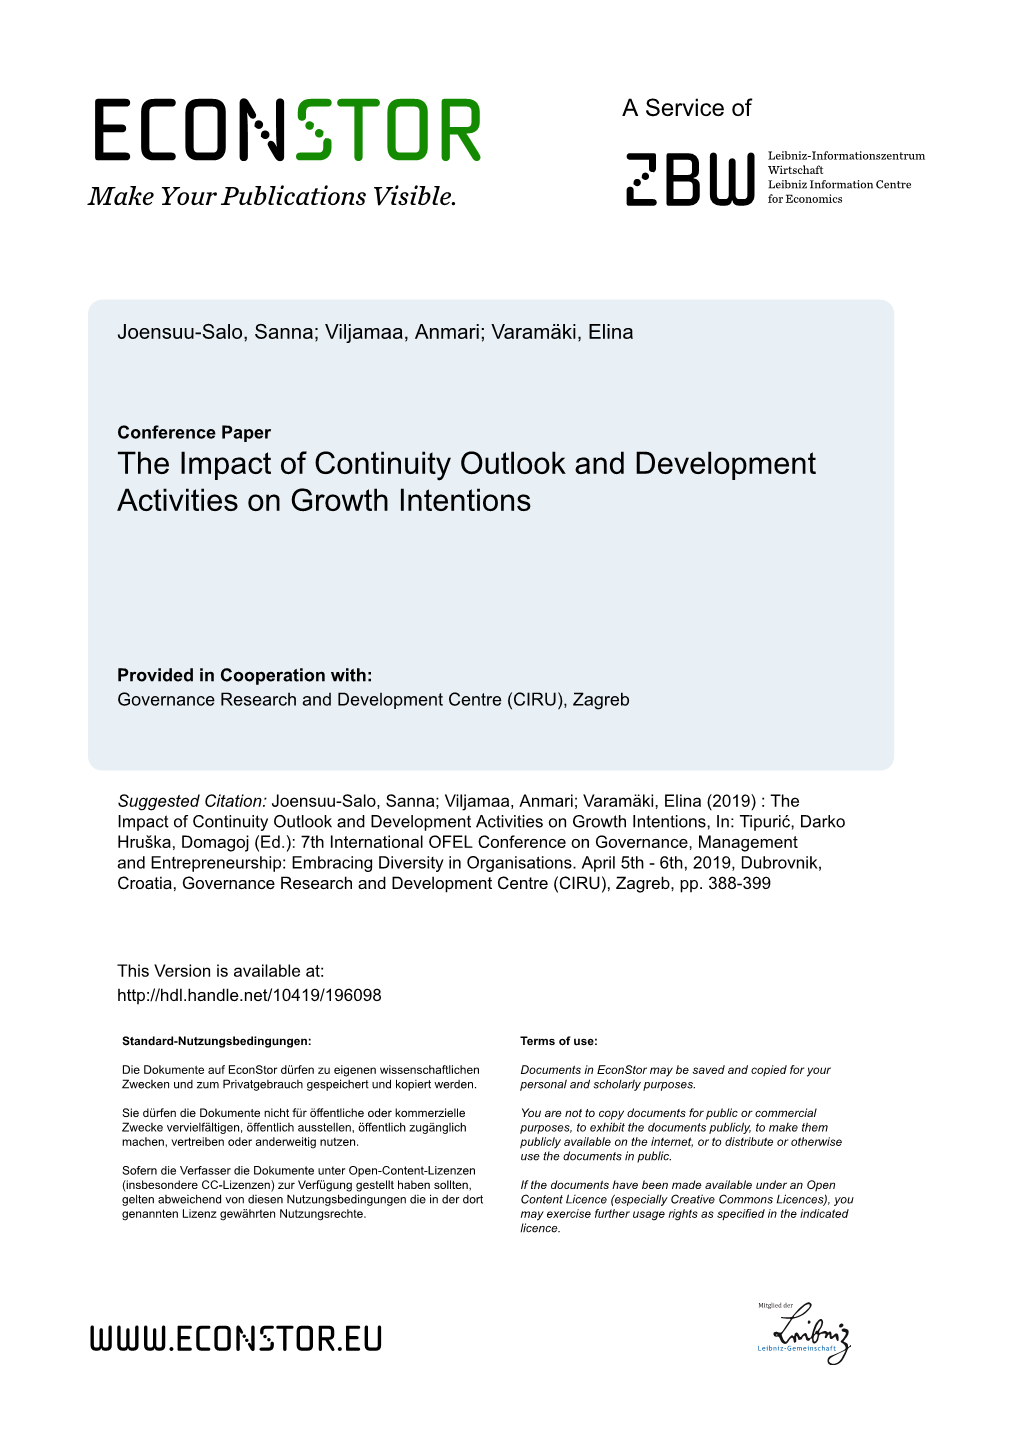 The Impact of Continuity Outlook and Development Activities on Growth Intentions